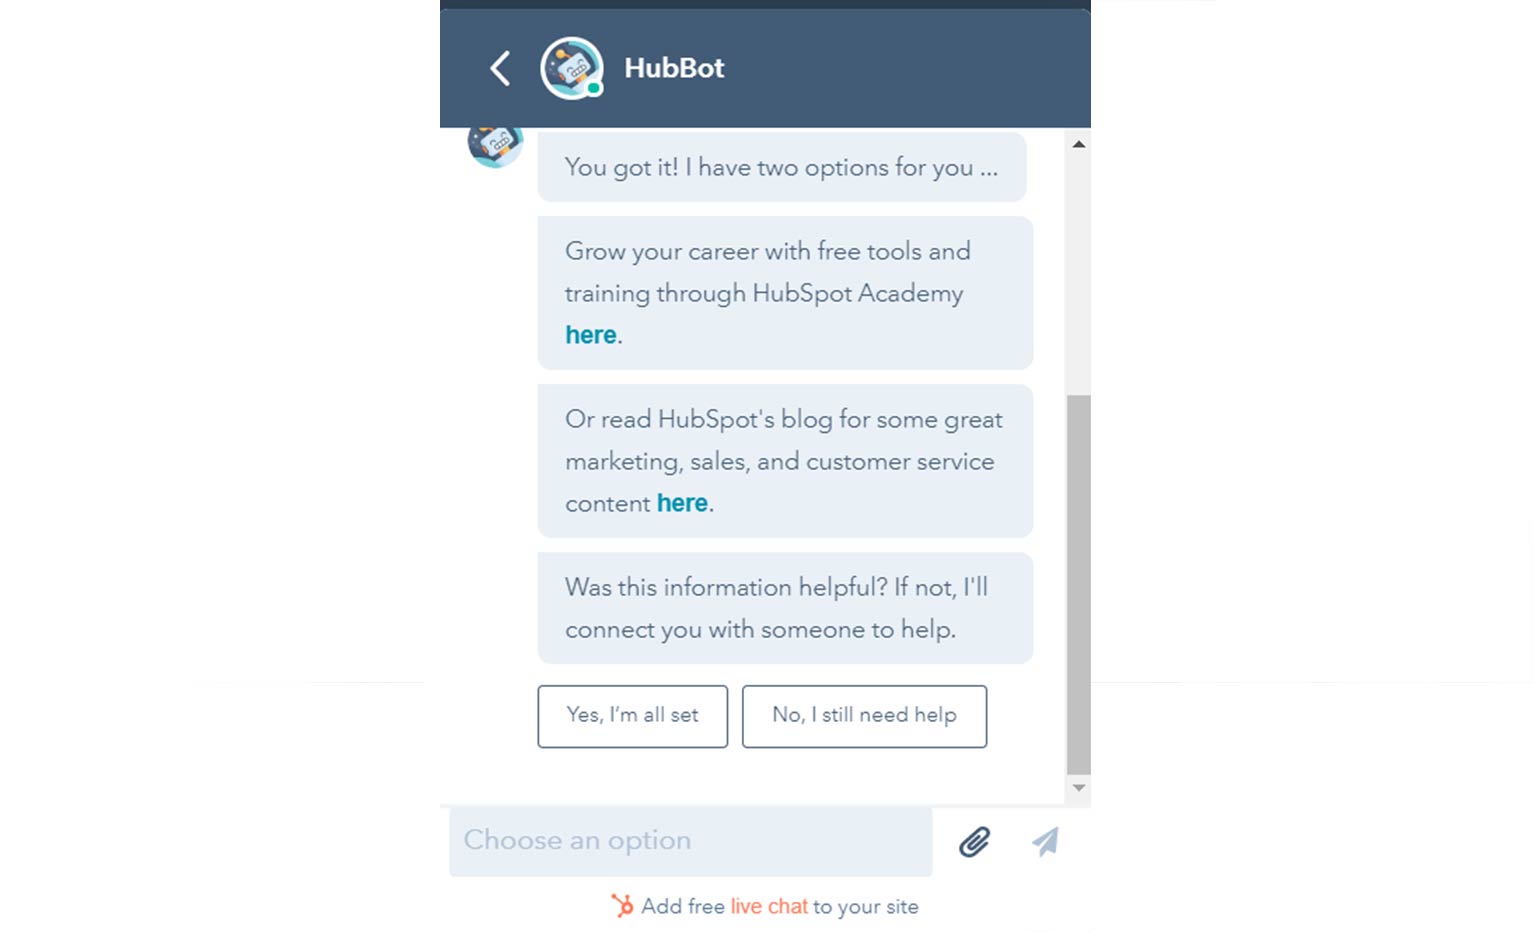 Depending on which button a user selects, HubSpot’s chatbot responds with relevant options and links to content that can answer user intent.